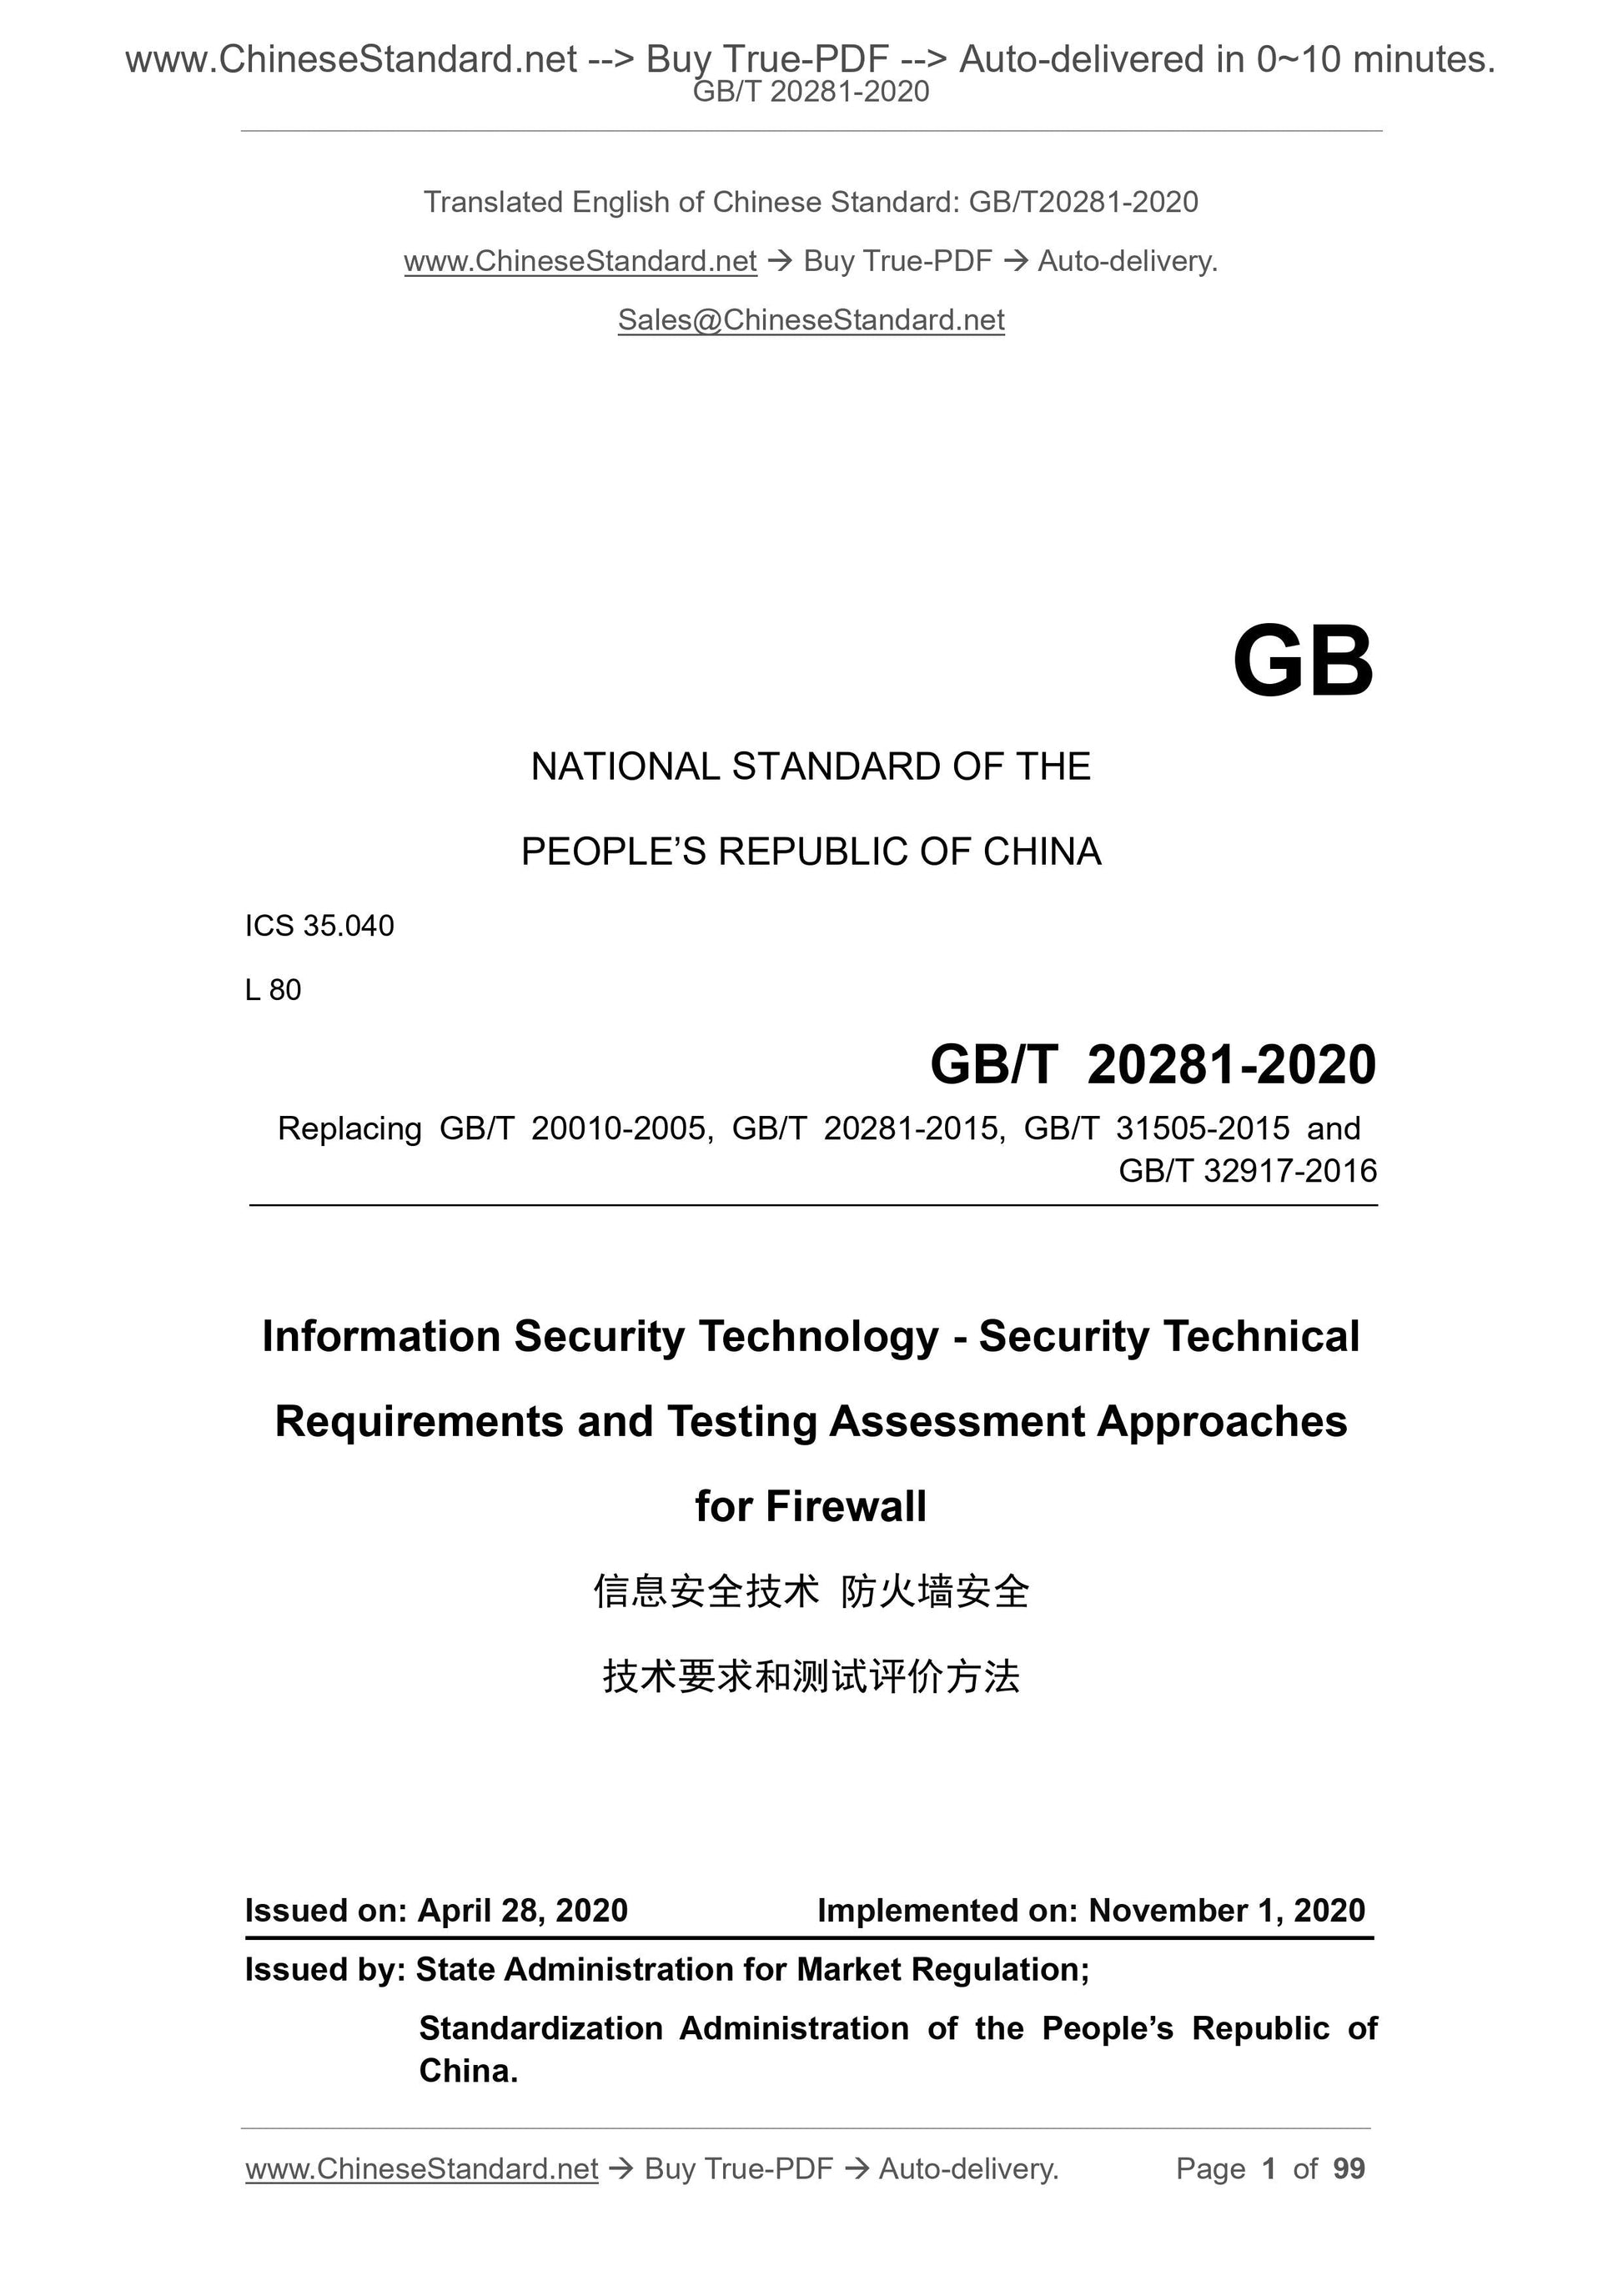 GB/T 20281-2020 Page 1